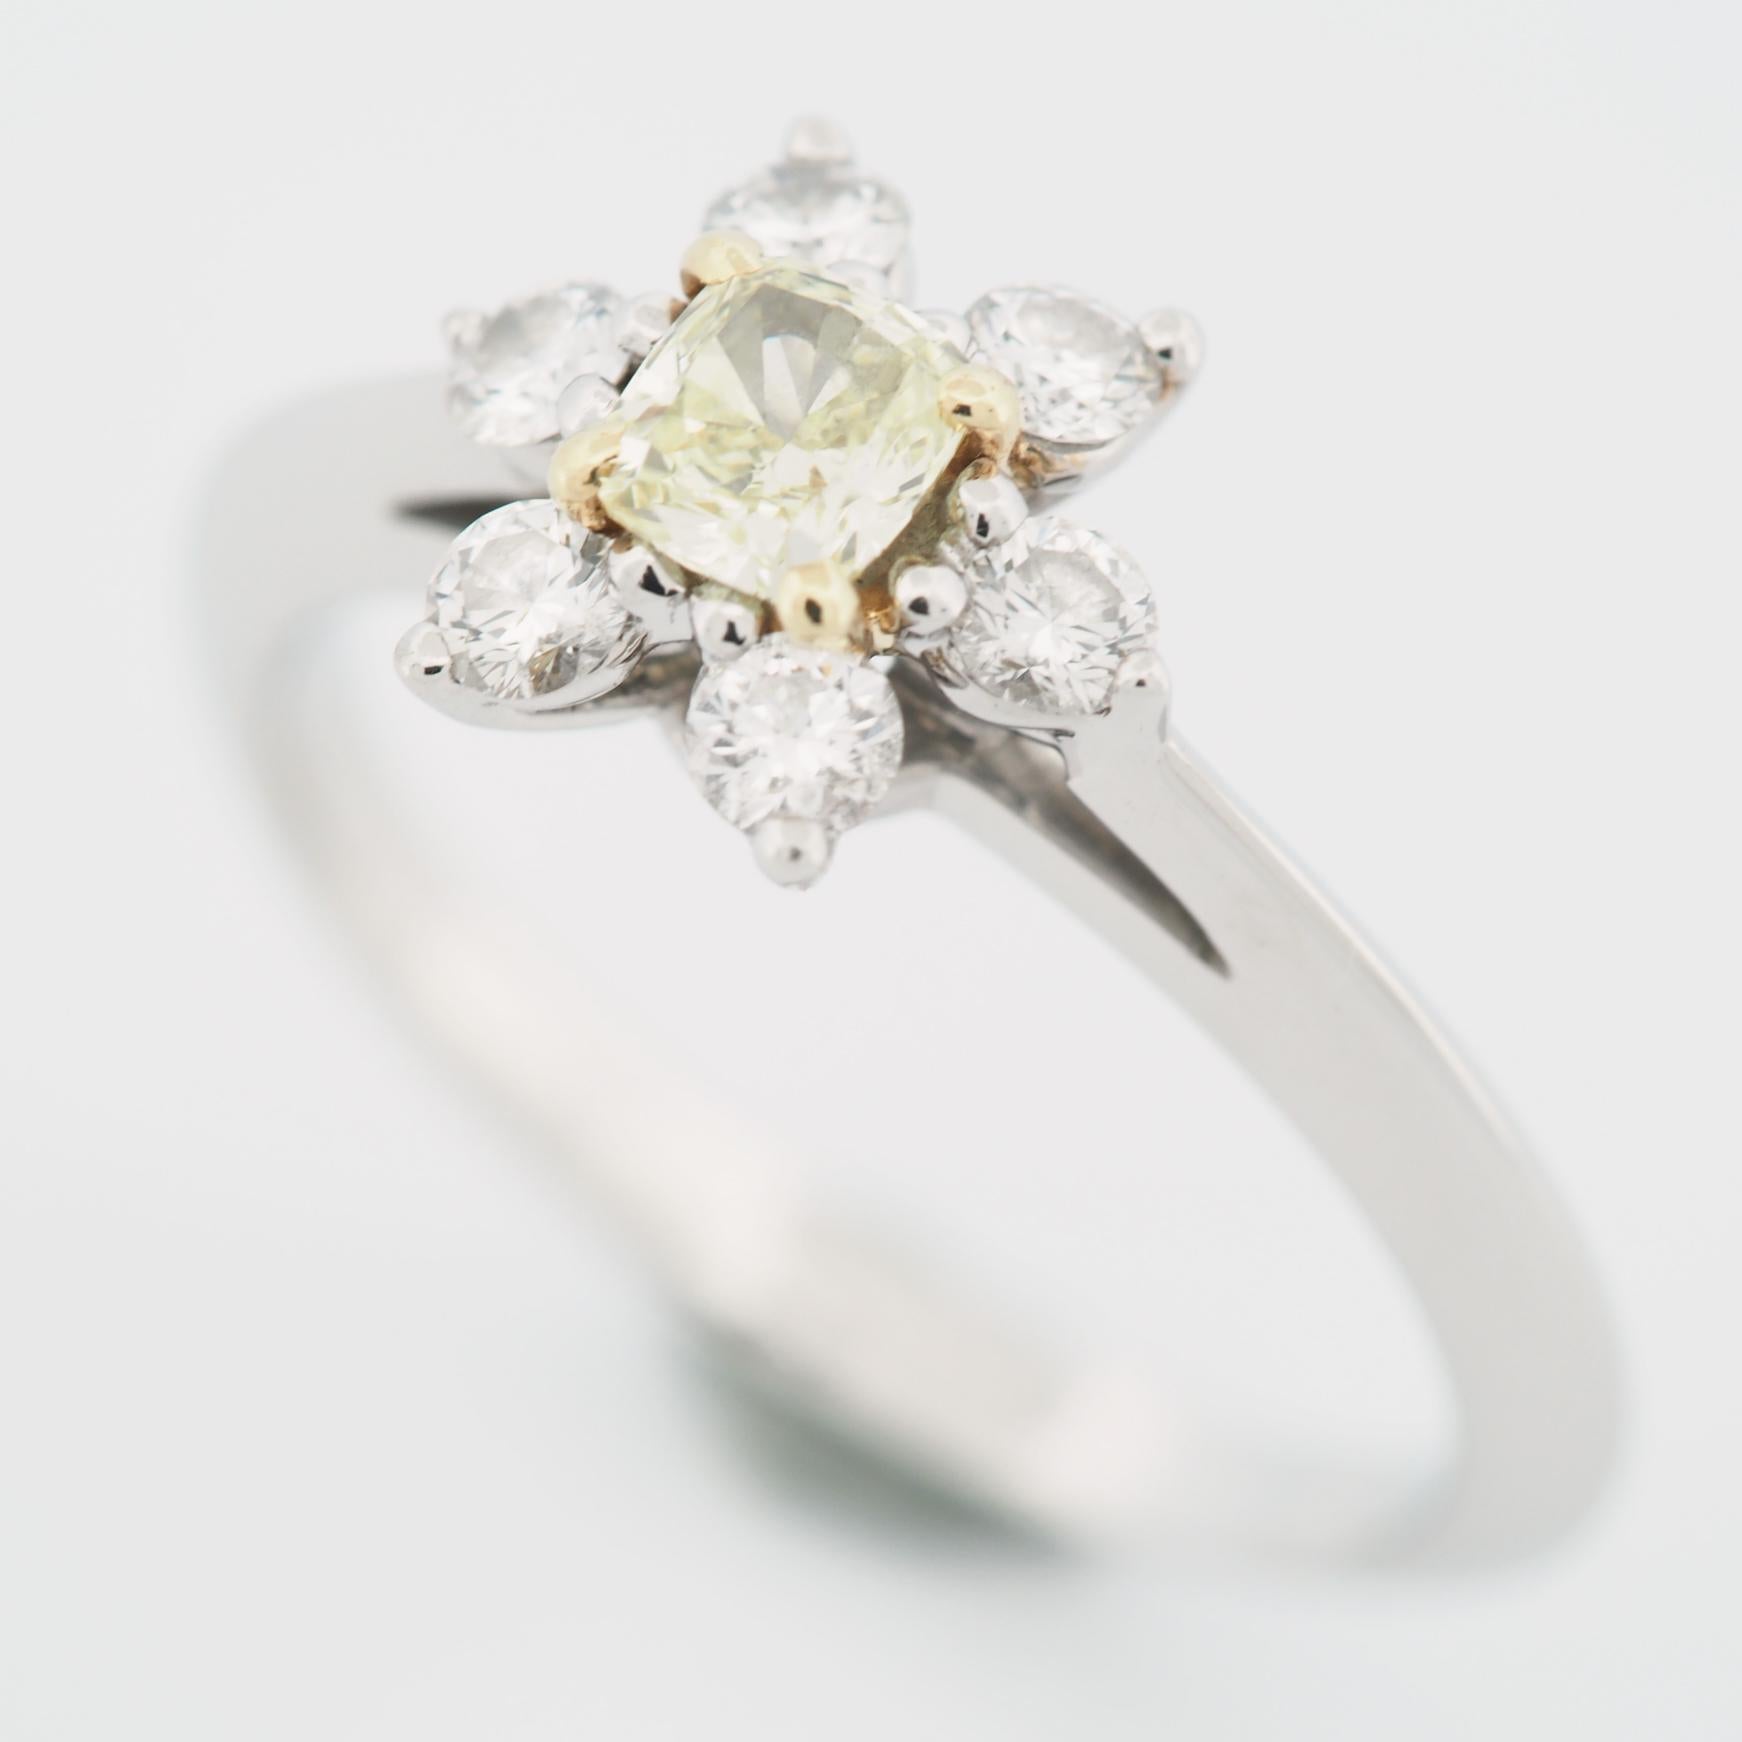 Item: Authentic Tiffany Buttercup Diamond Ring 
Stones: Diamond / 0.25ct
Color: Fancy Yellow
Clarity: VVS1
Polish: Excellent
Symmetry: Very Good
Fluorescence: None
Metal: Platinum 950 / 18K Gold
Ring Size: US SIZE 4.75 UK SIZE I 3/4
Internal